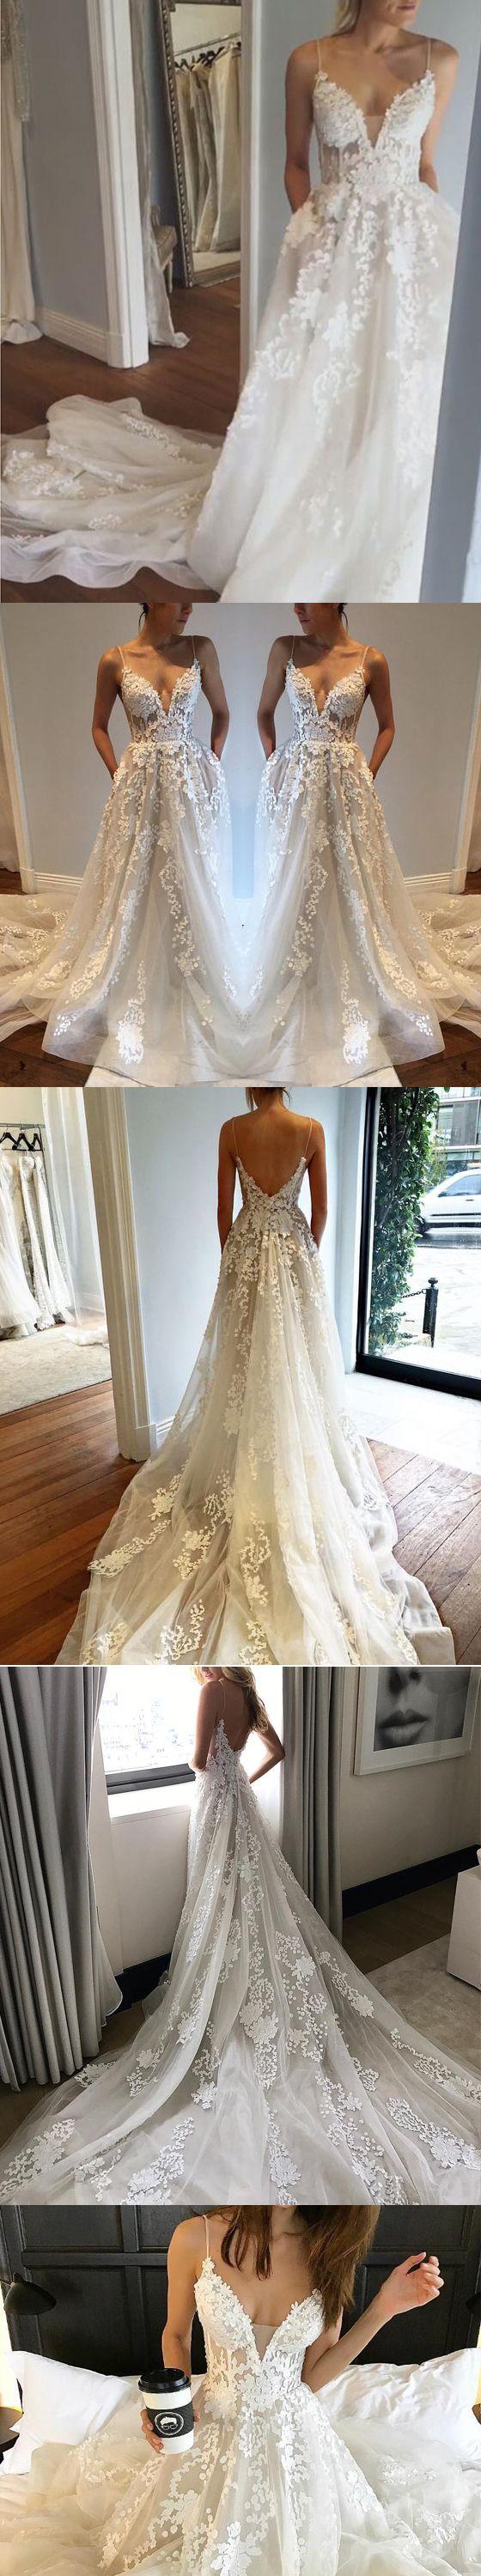 Mariage - Applique Sexy Online V Neck Ivory Fashion Long Prom Wedding Dresses, BG51501 - US0 / Picture Color